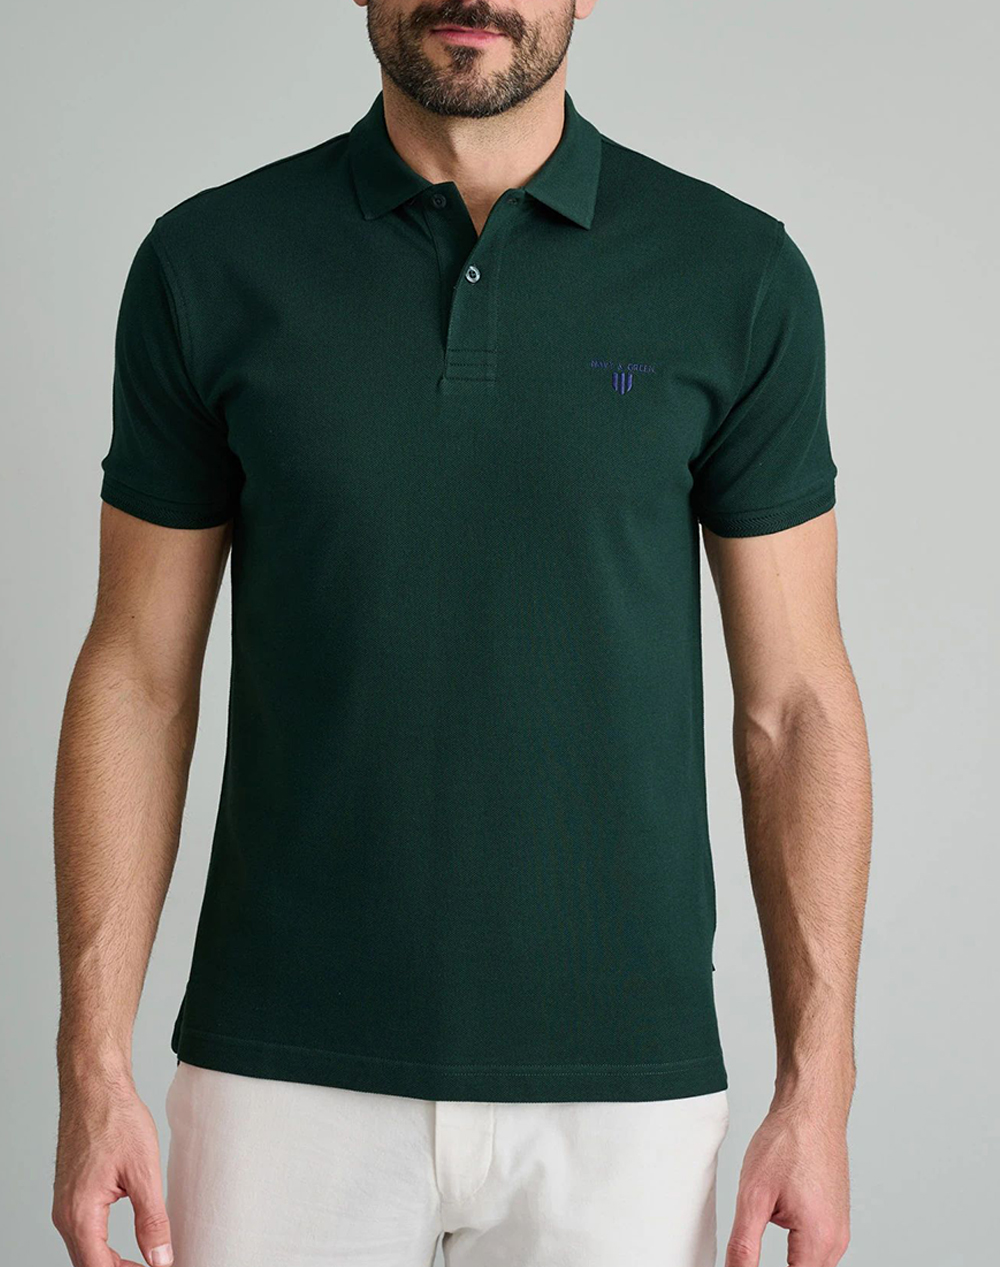 NAVY&GREEN POLO ΜΠΛΟΥΖΑΚΙ-YOUNG LINE 24EY.007/PL/YL-DEEPEST GREEN DarkGreen 3820PNAVY3410092_XR28148